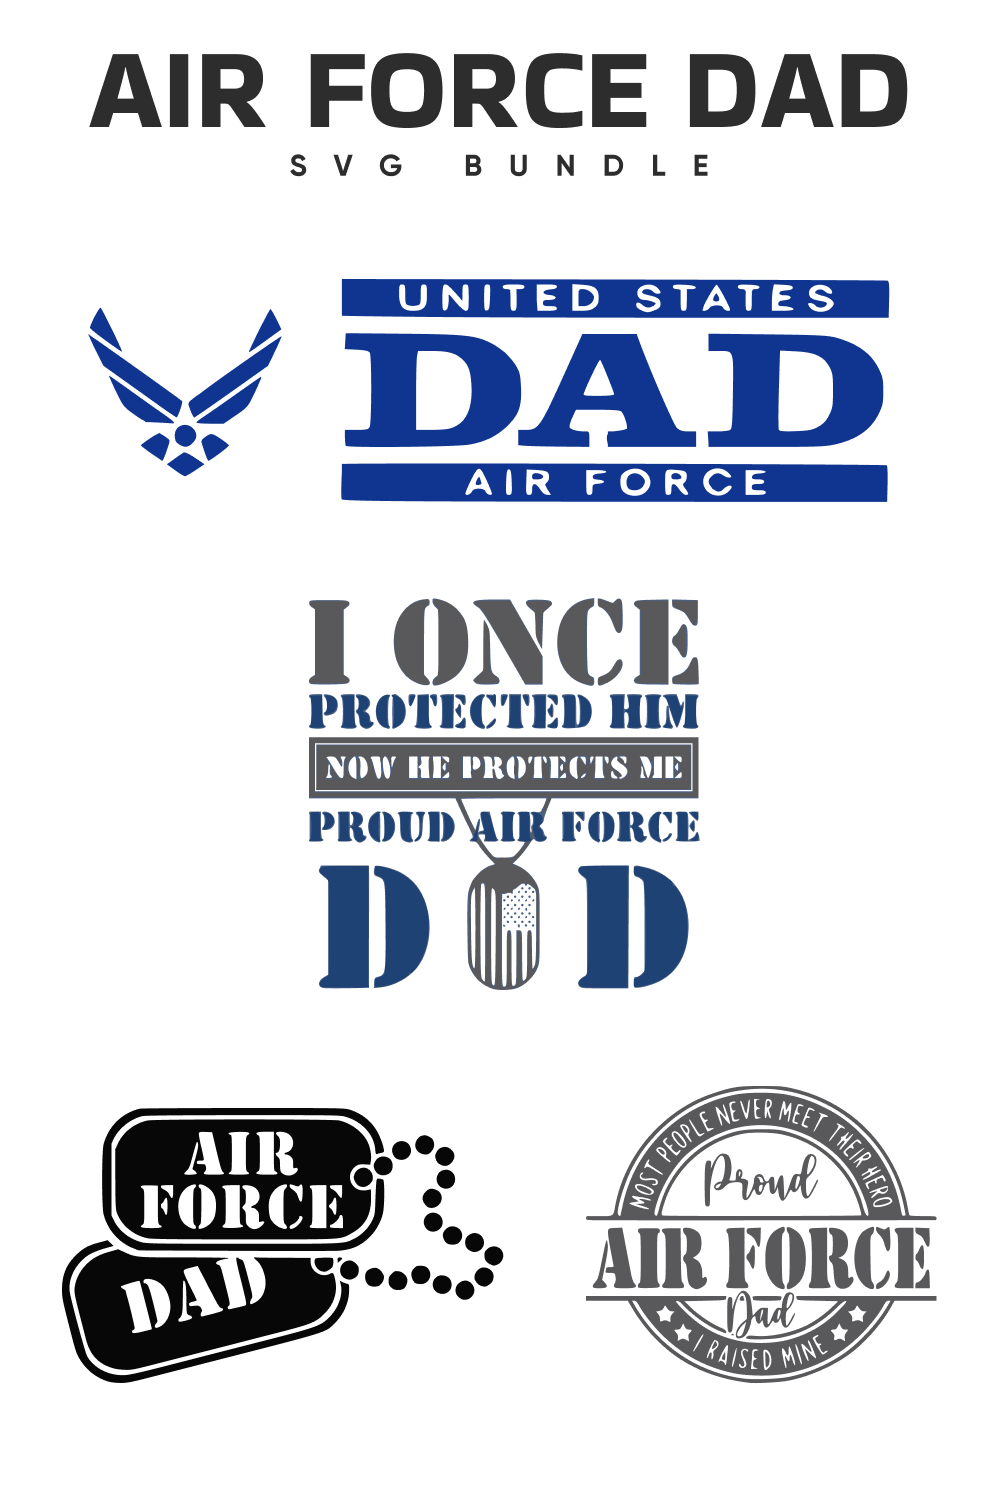 Logos with inscription "United States Dad Air Force".